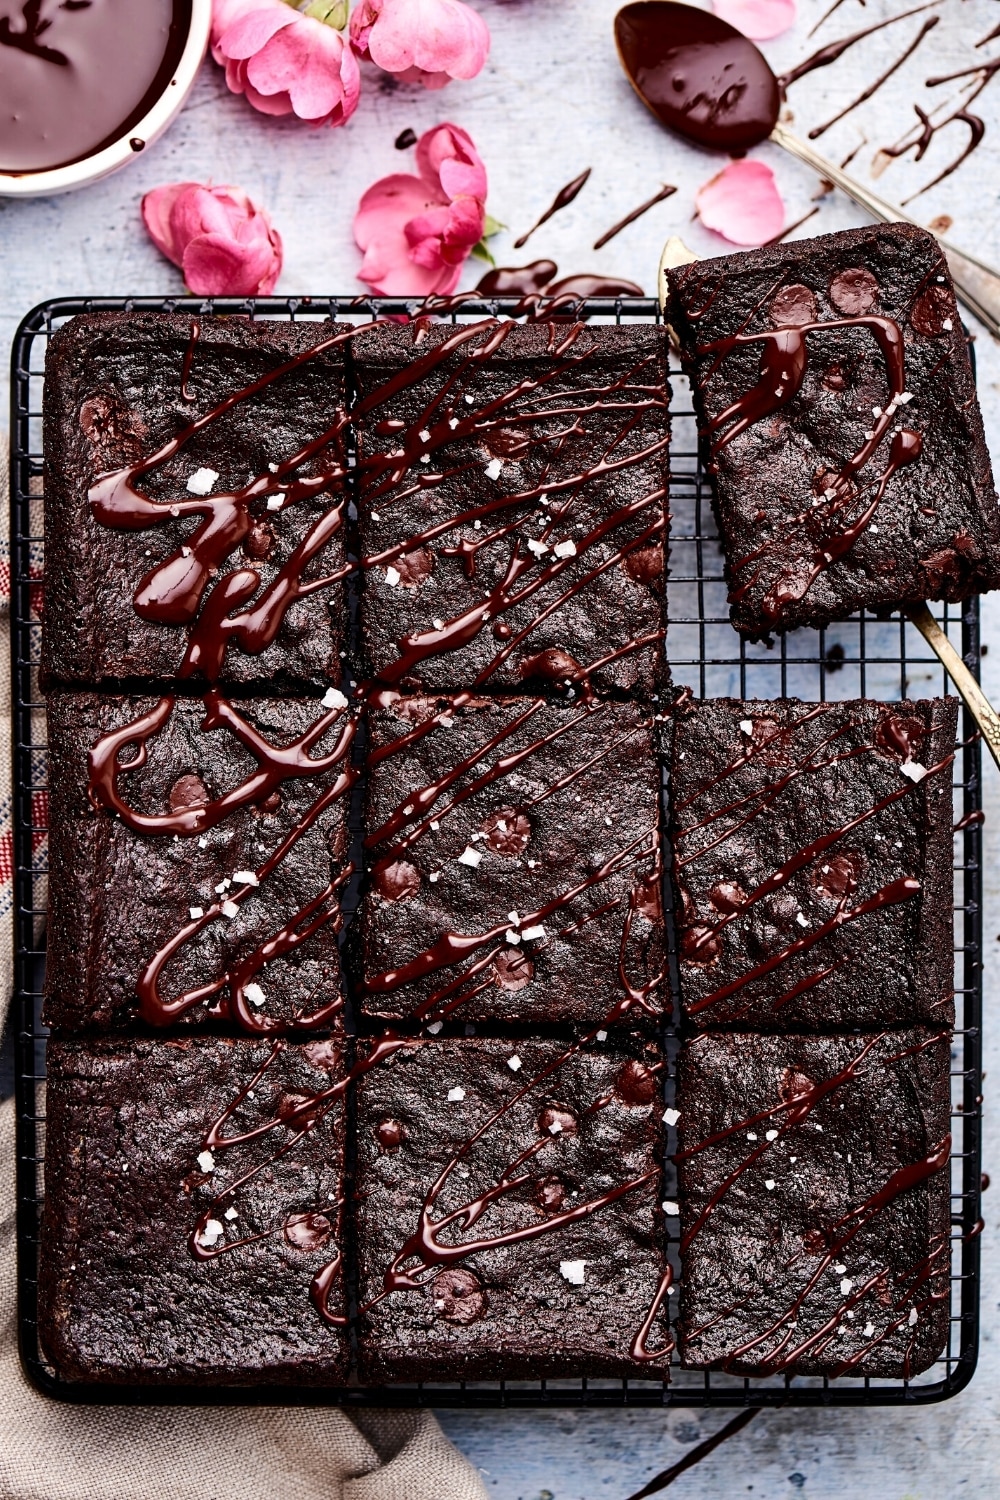 Three rows of three brownies on a wire rack on a gray counter. The top right Brownie is being pulled away from the rest of them with a spatula.